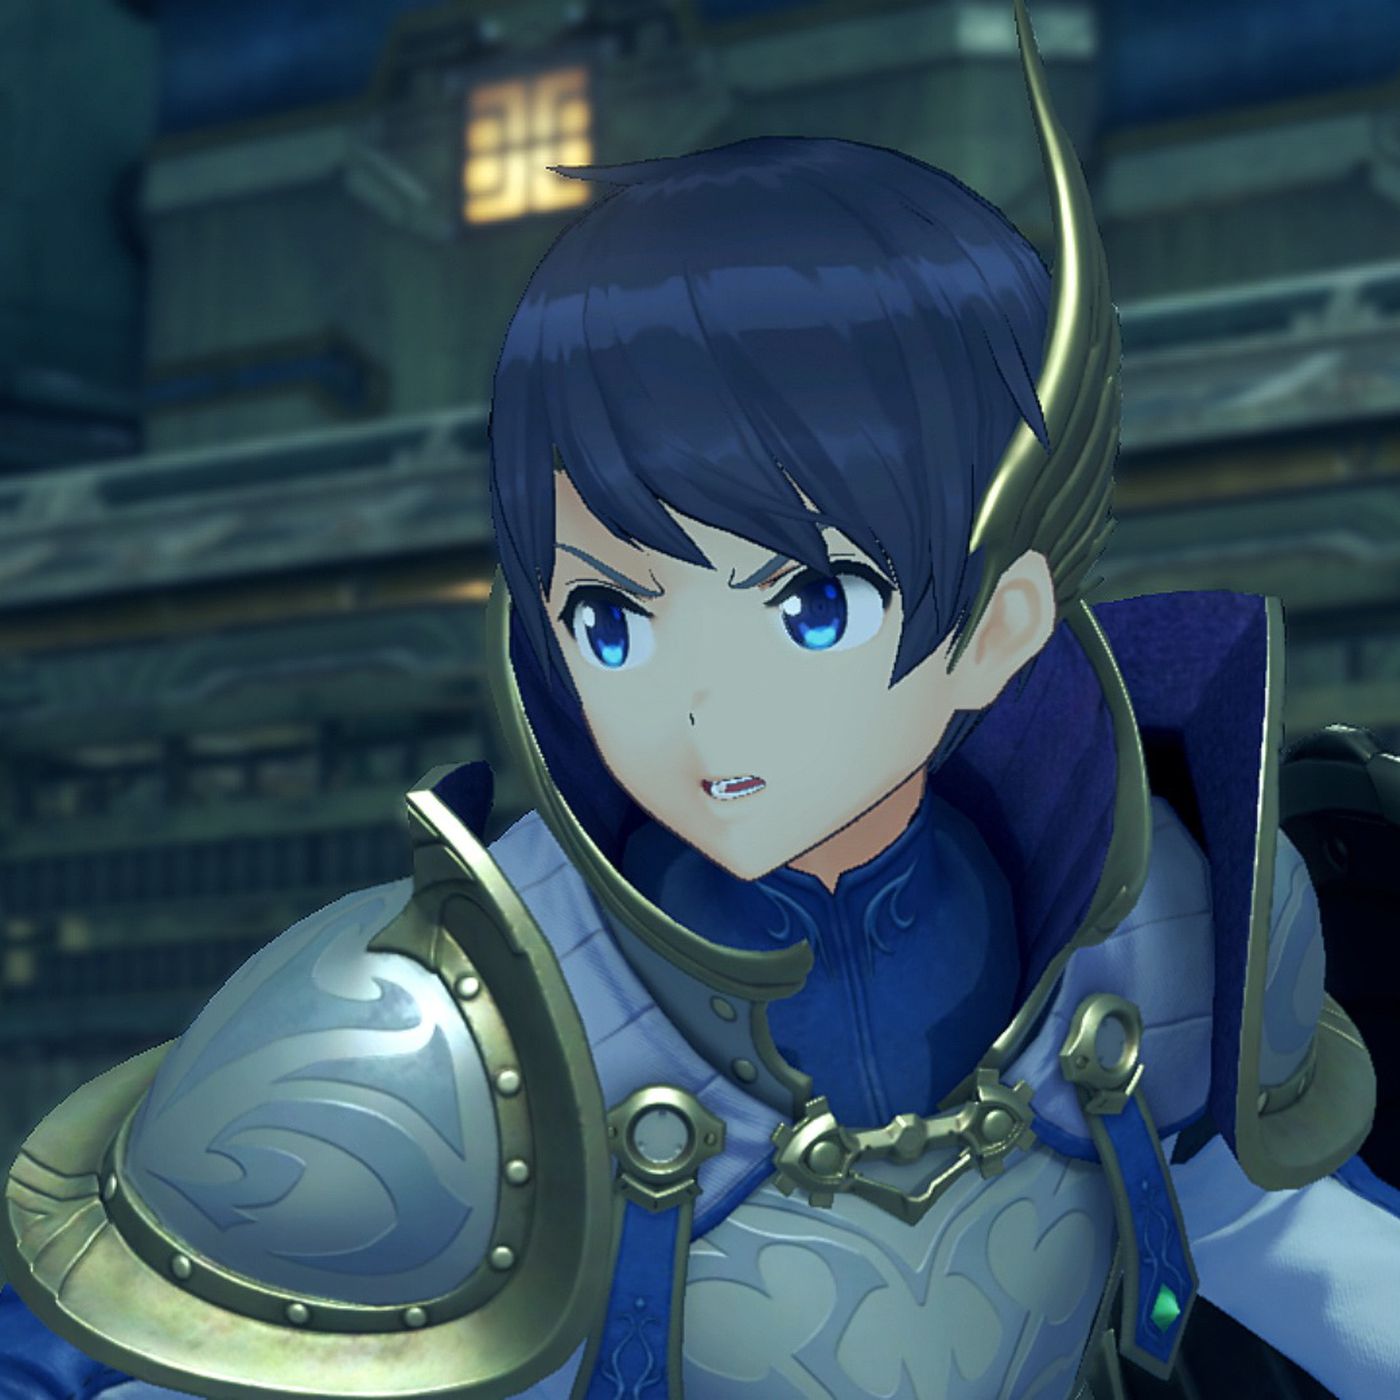 arthur hipolito recommends xenoblade chronicles 2 who was scoping out the site pic